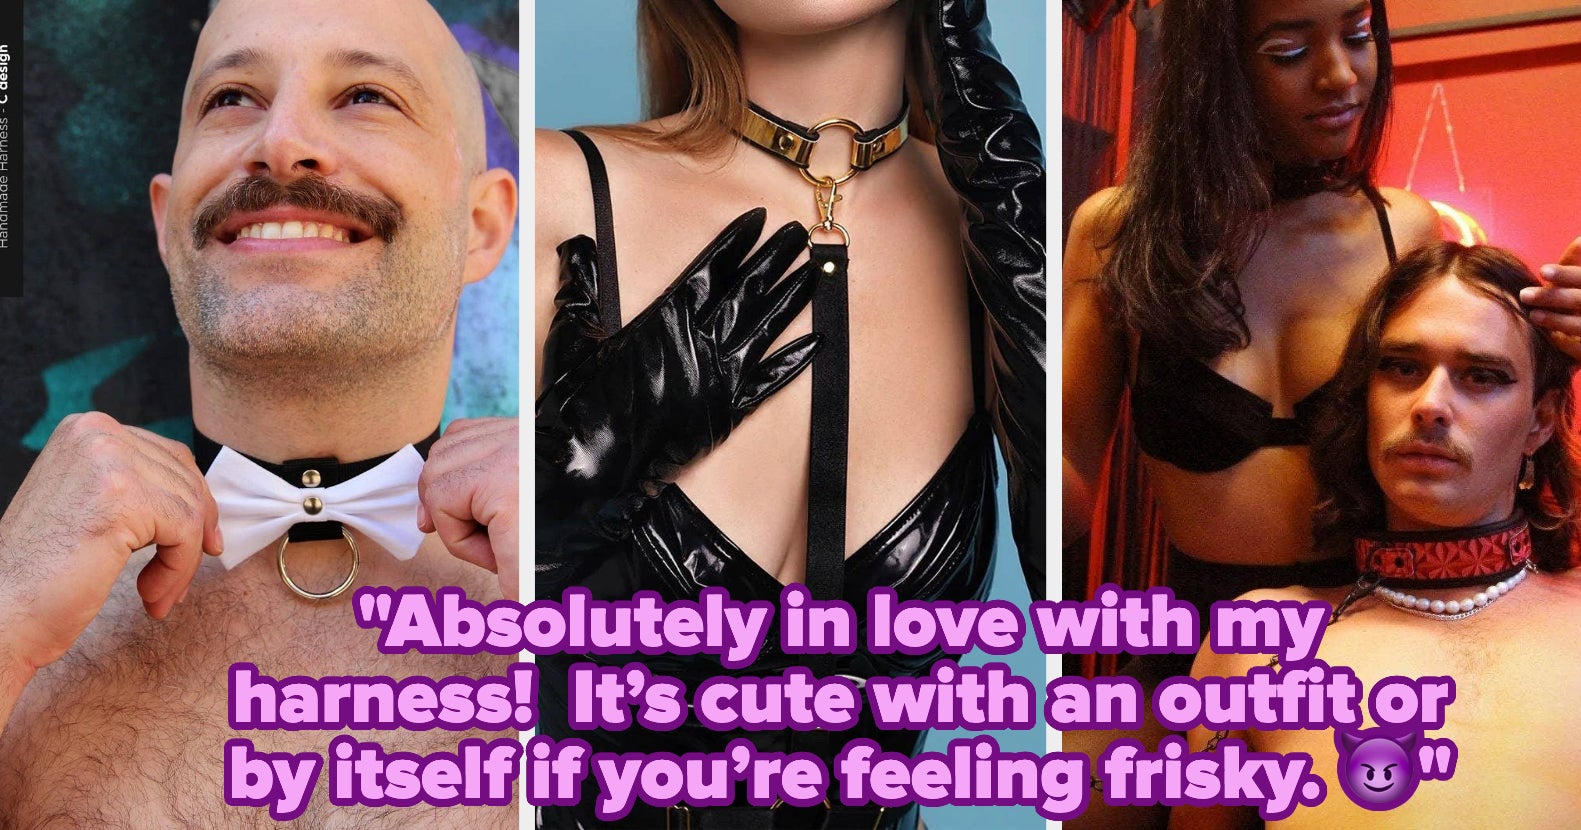 Dog Collar Leash Bondage Forced Lesbian Porn - 17 Best BDSM Collars That Really Go For The Throat 2022